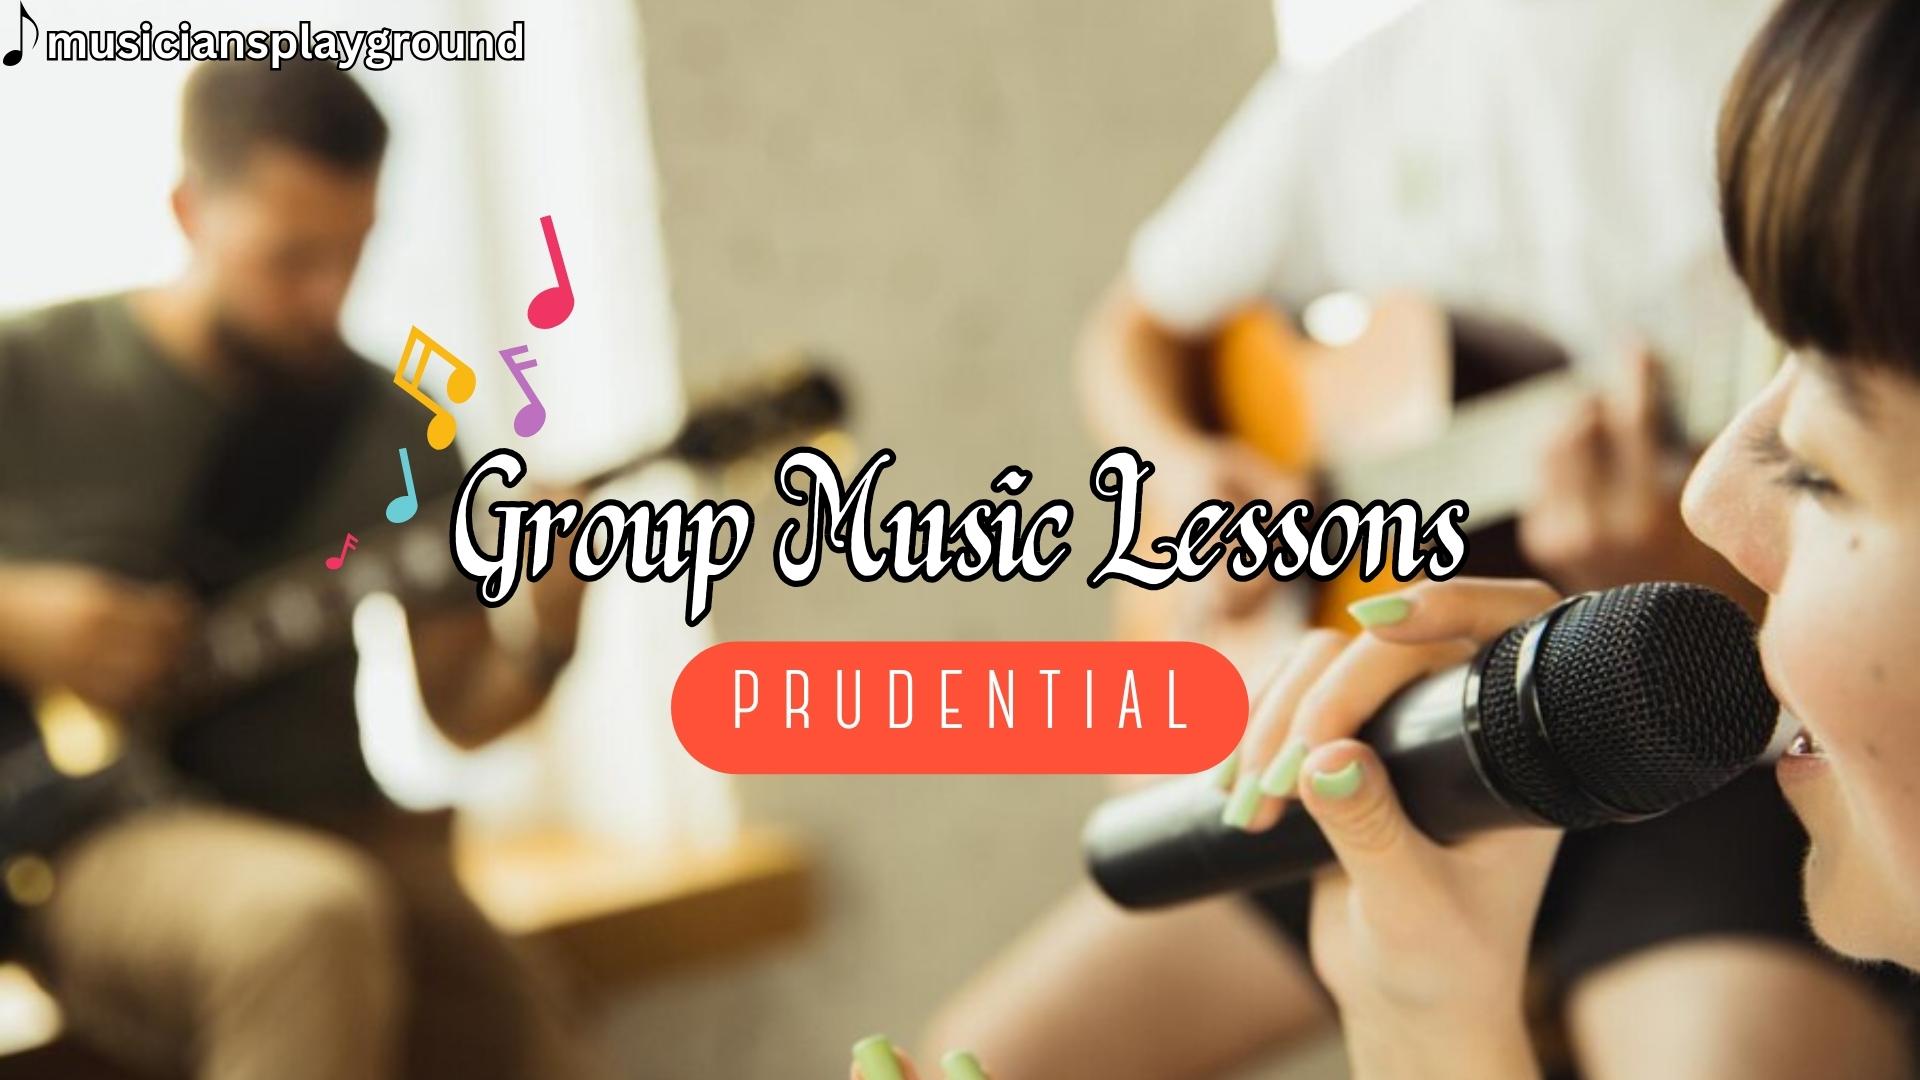 Group Music Lessons in Prudential, Massachusetts: Enhance Your Musical Journey at Musicians Playground